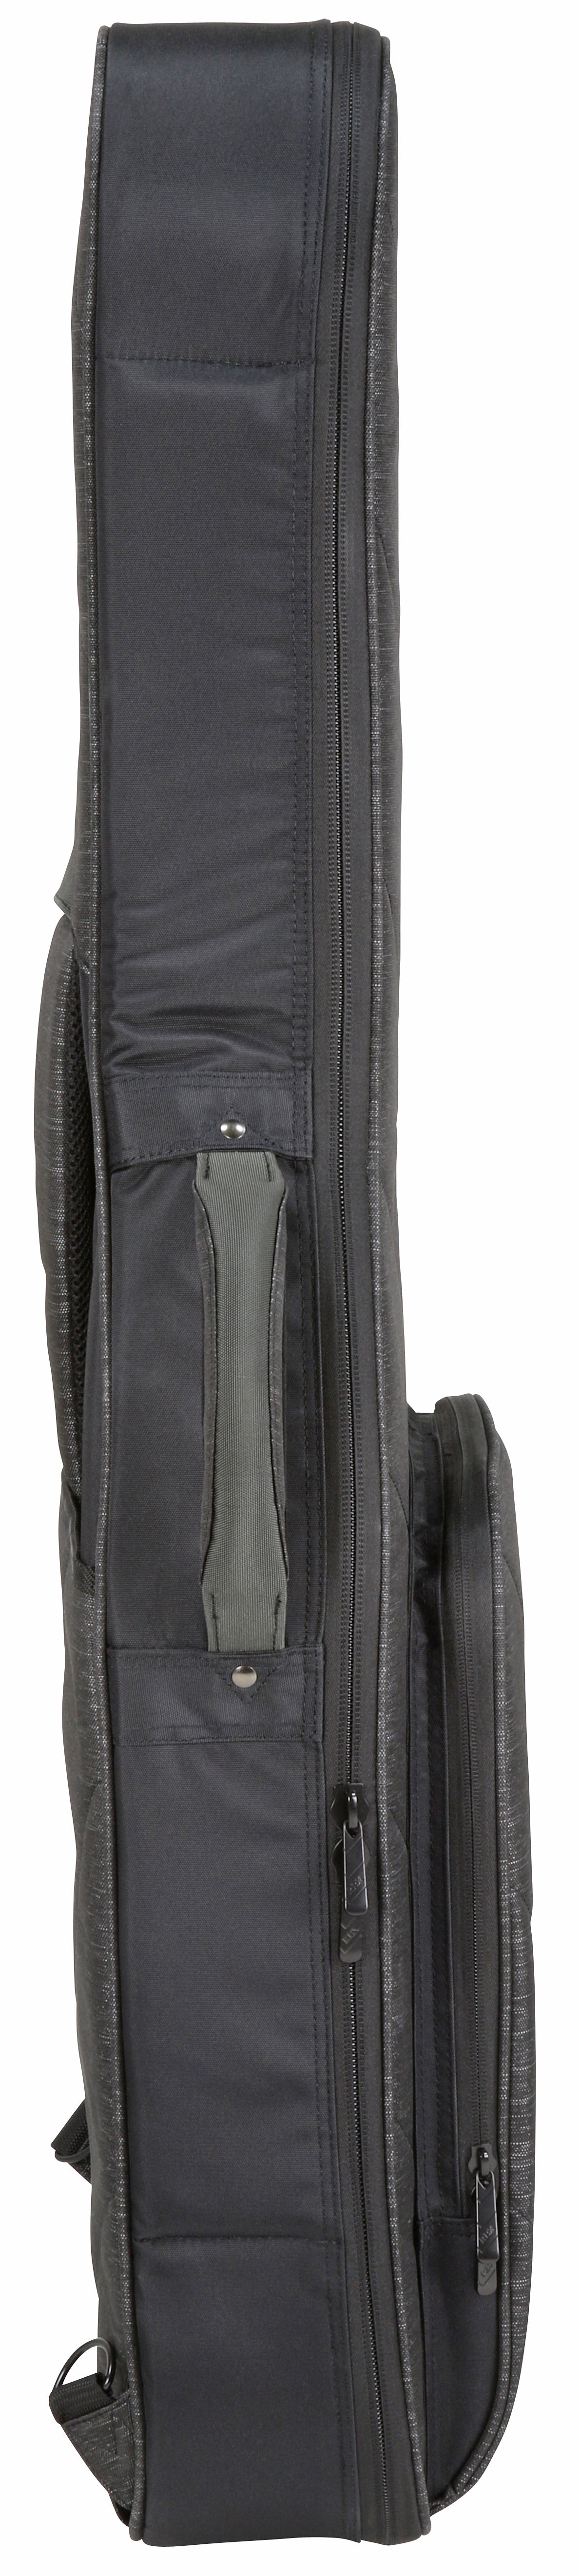 RBX Oxford Electric Guitar Bag - Side